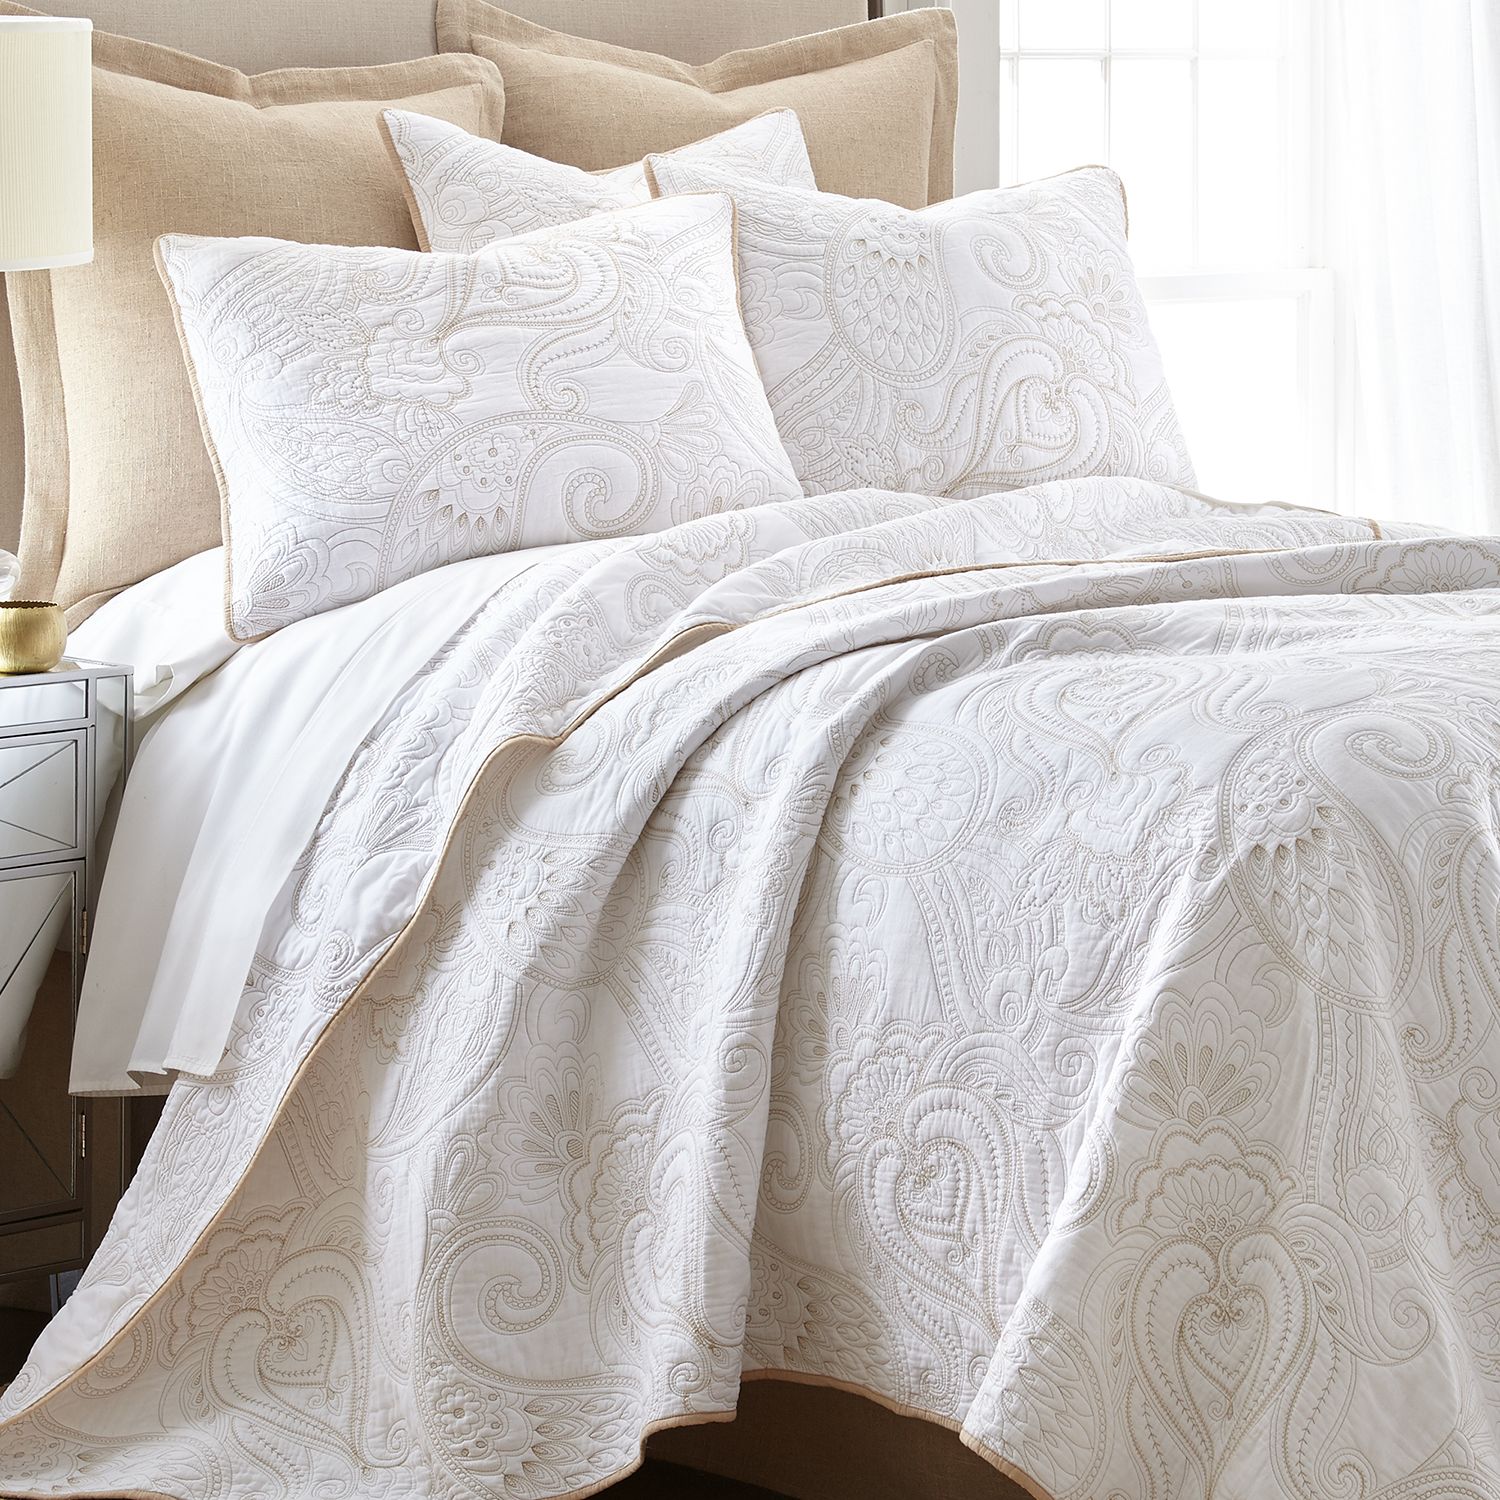 Image for Levtex Home Modena Quilt Set at Kohl's.